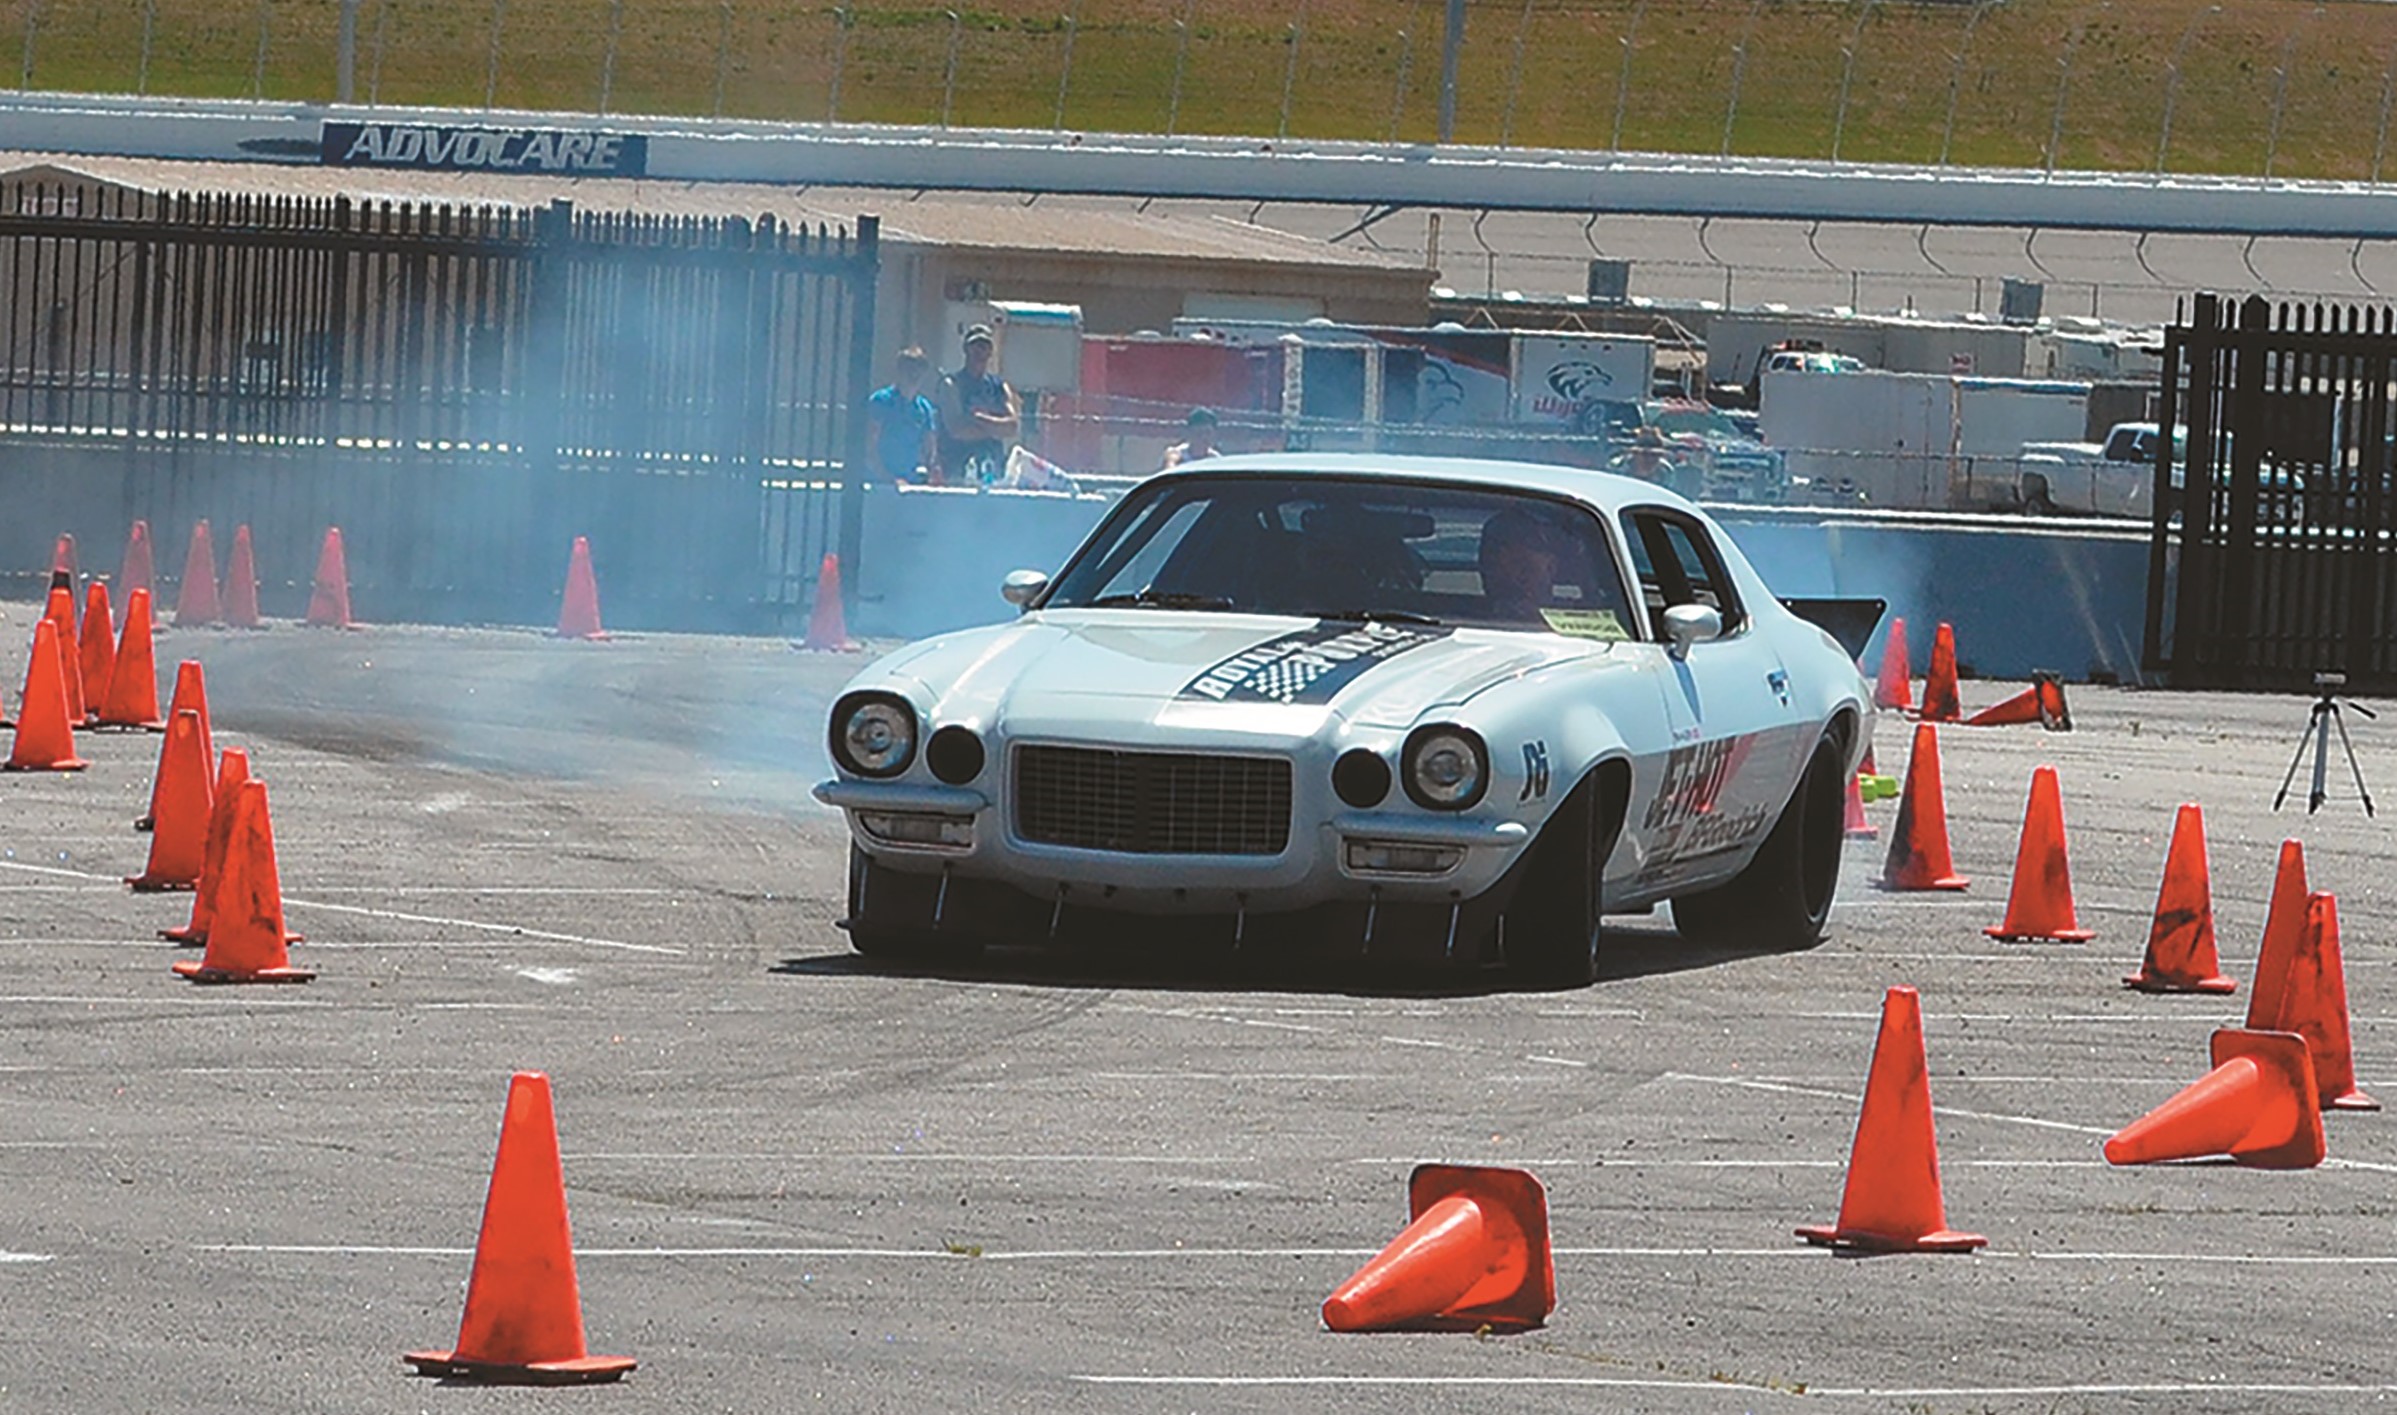 https://www.onallcylinders.com/wp-content/uploads/2022/04/29/vintgae-chevy-camaro-accelerates-with-tire-smoke-through-cones-on-an-autocross-track.jpg